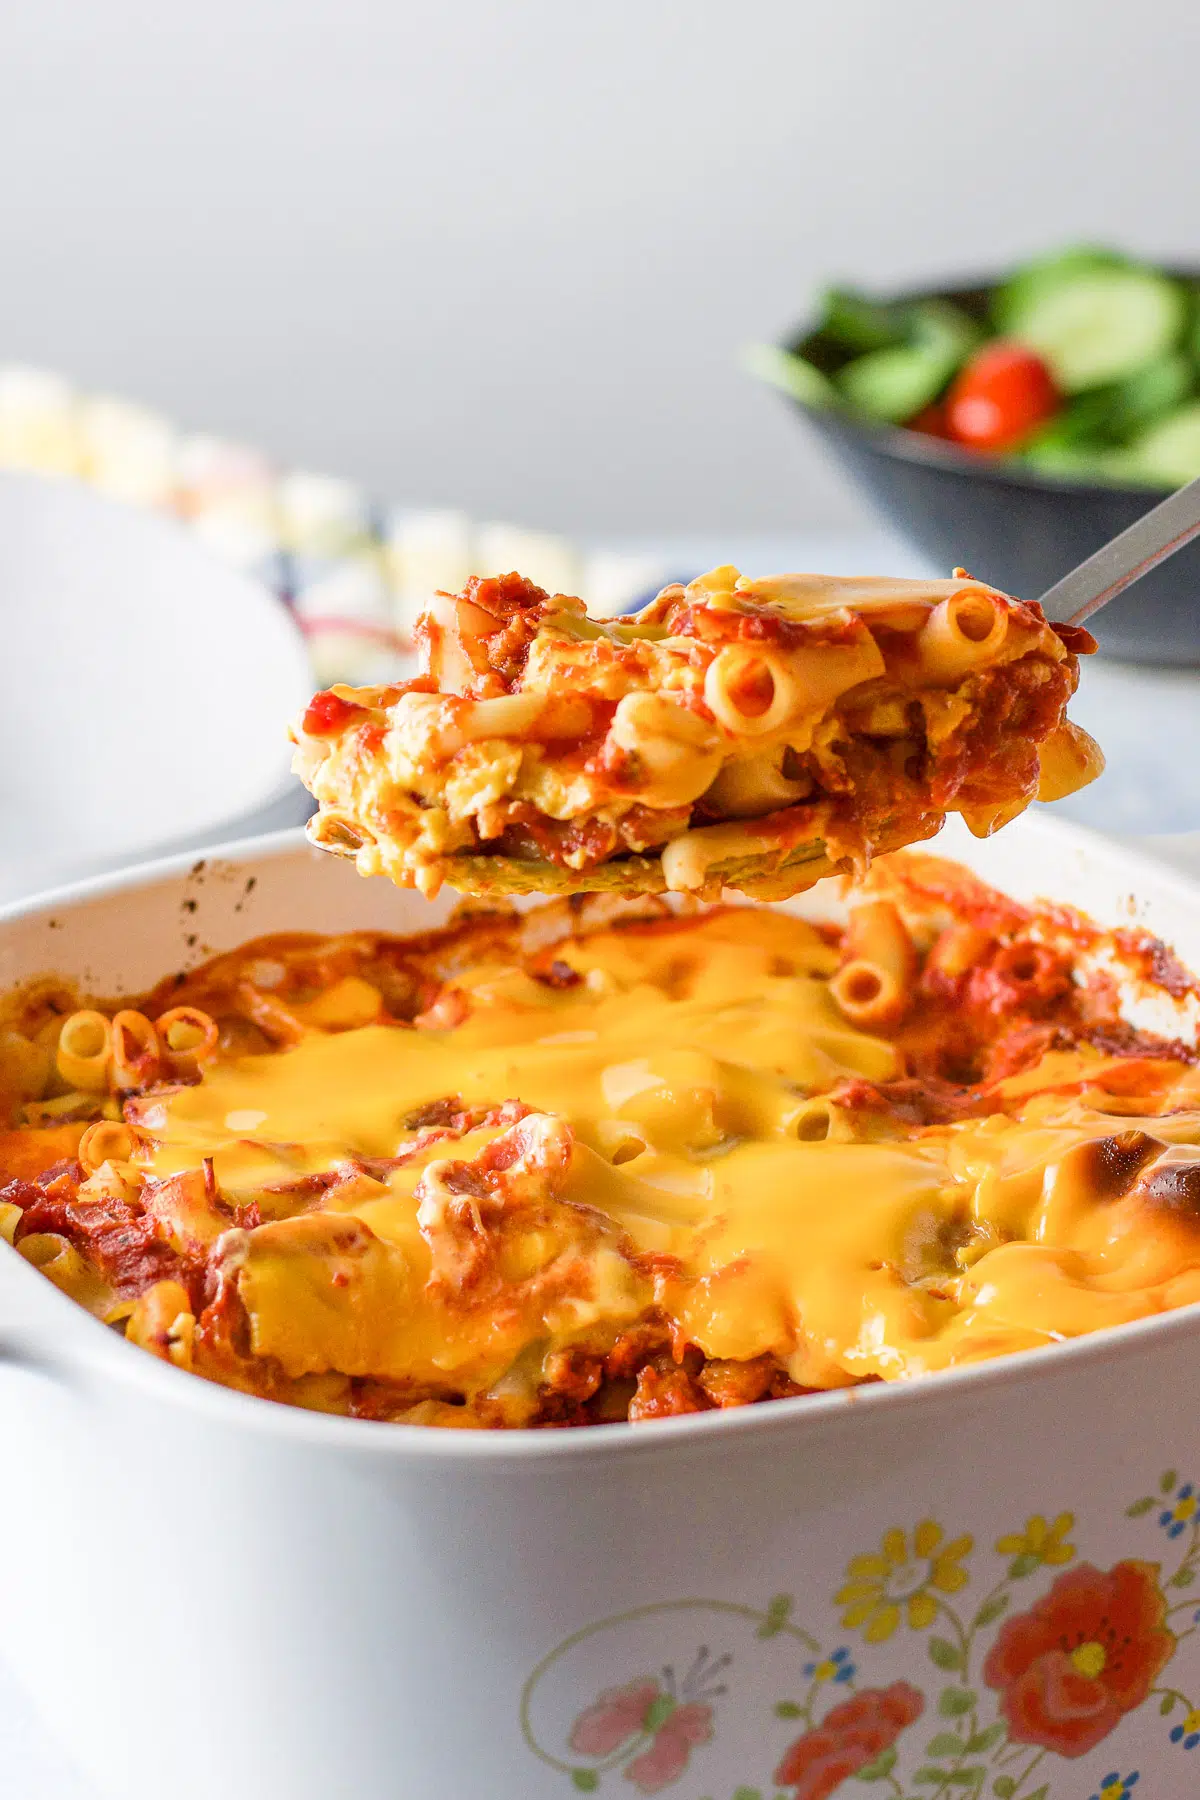 A big spoonful of pasta casserole held over the casserole dish